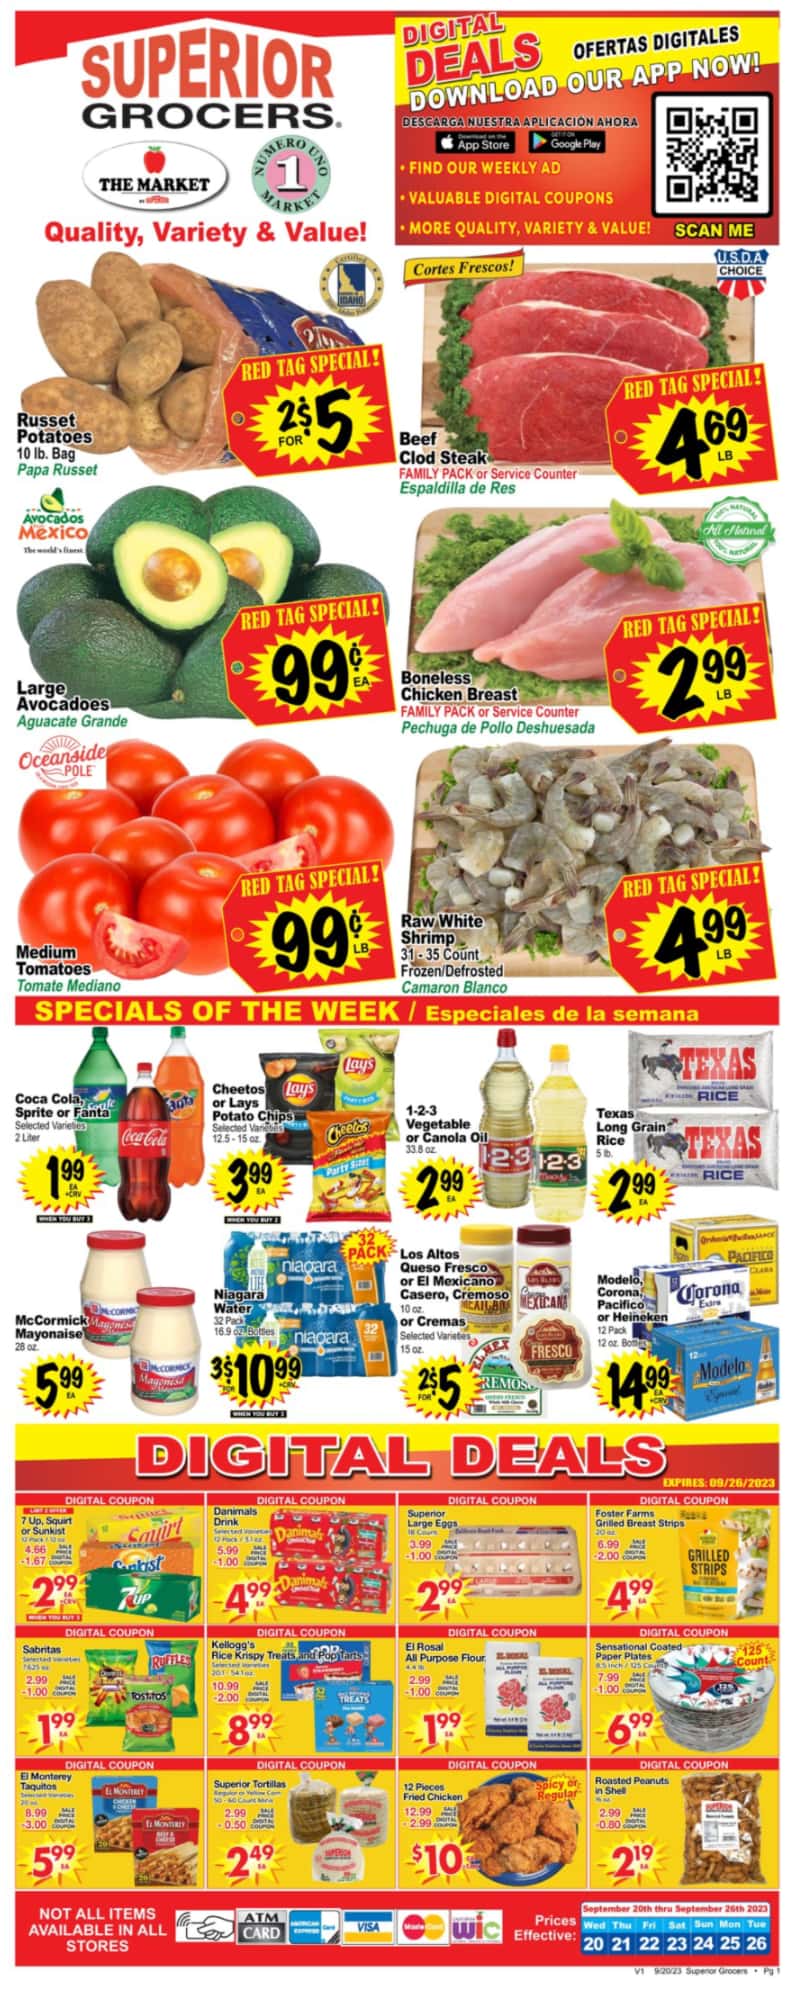 Superior Grocers Weekly Ad May 25 to May 31, 2022 1 – superior grocers ad 1